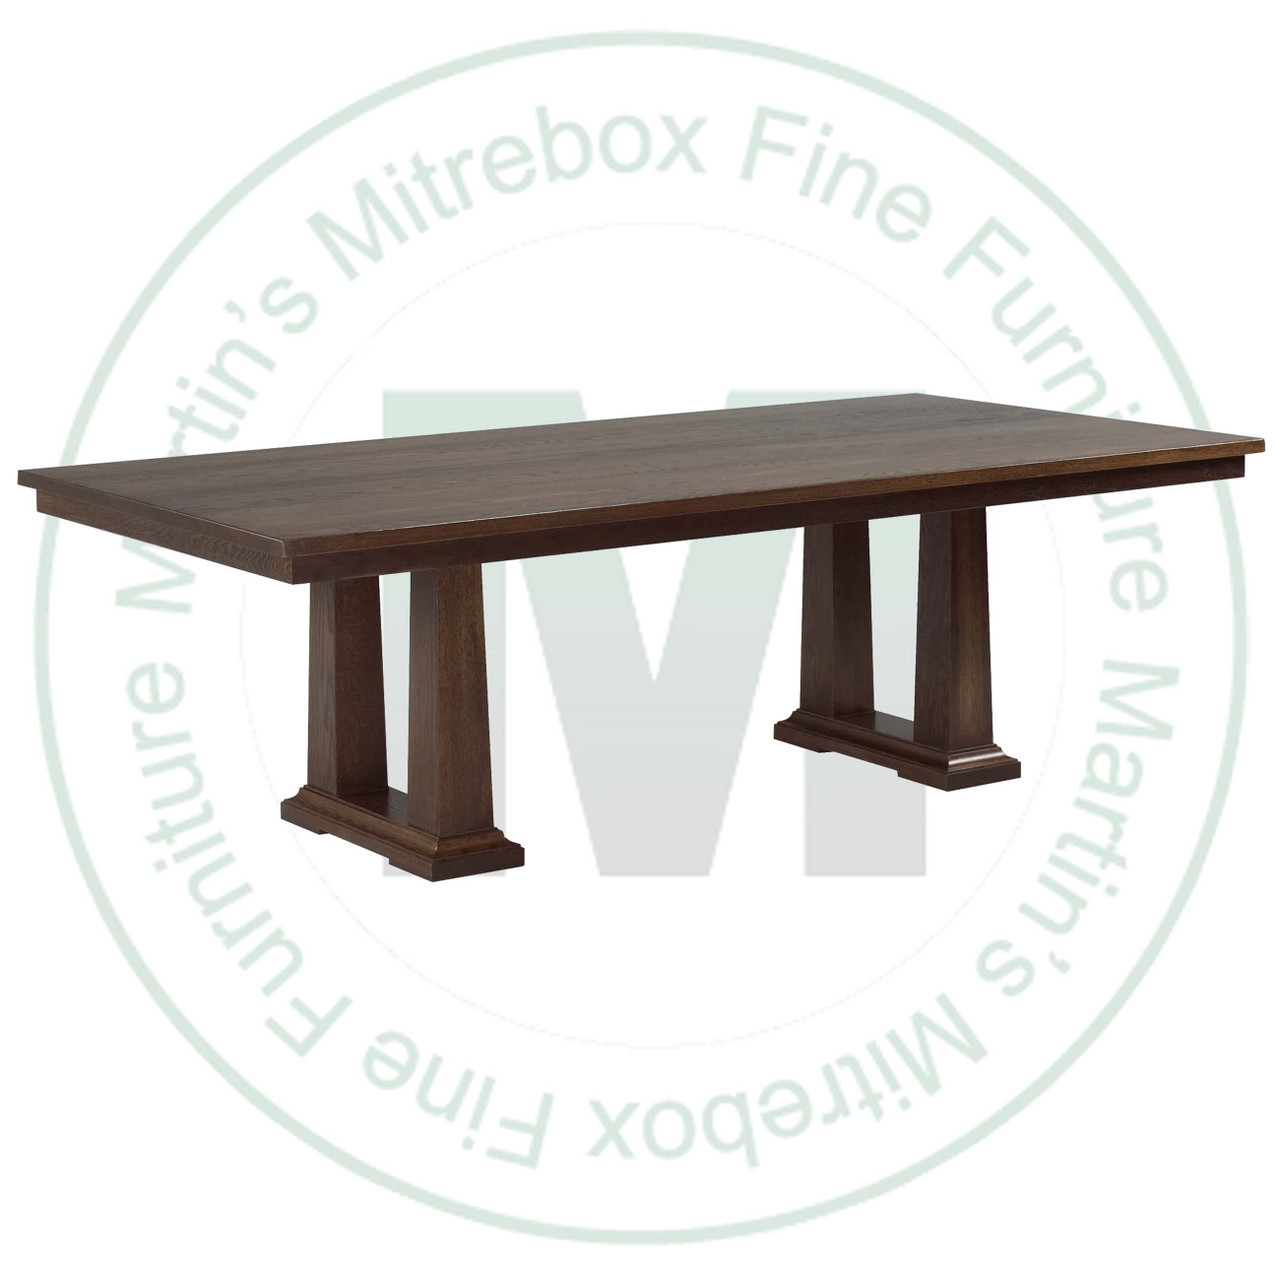 Maple Acropolis Extension Double Pedestal Table 54''D x 96''W x 30''H With 3 - 12'' Leaves Table Has 1.25'' Thick Top